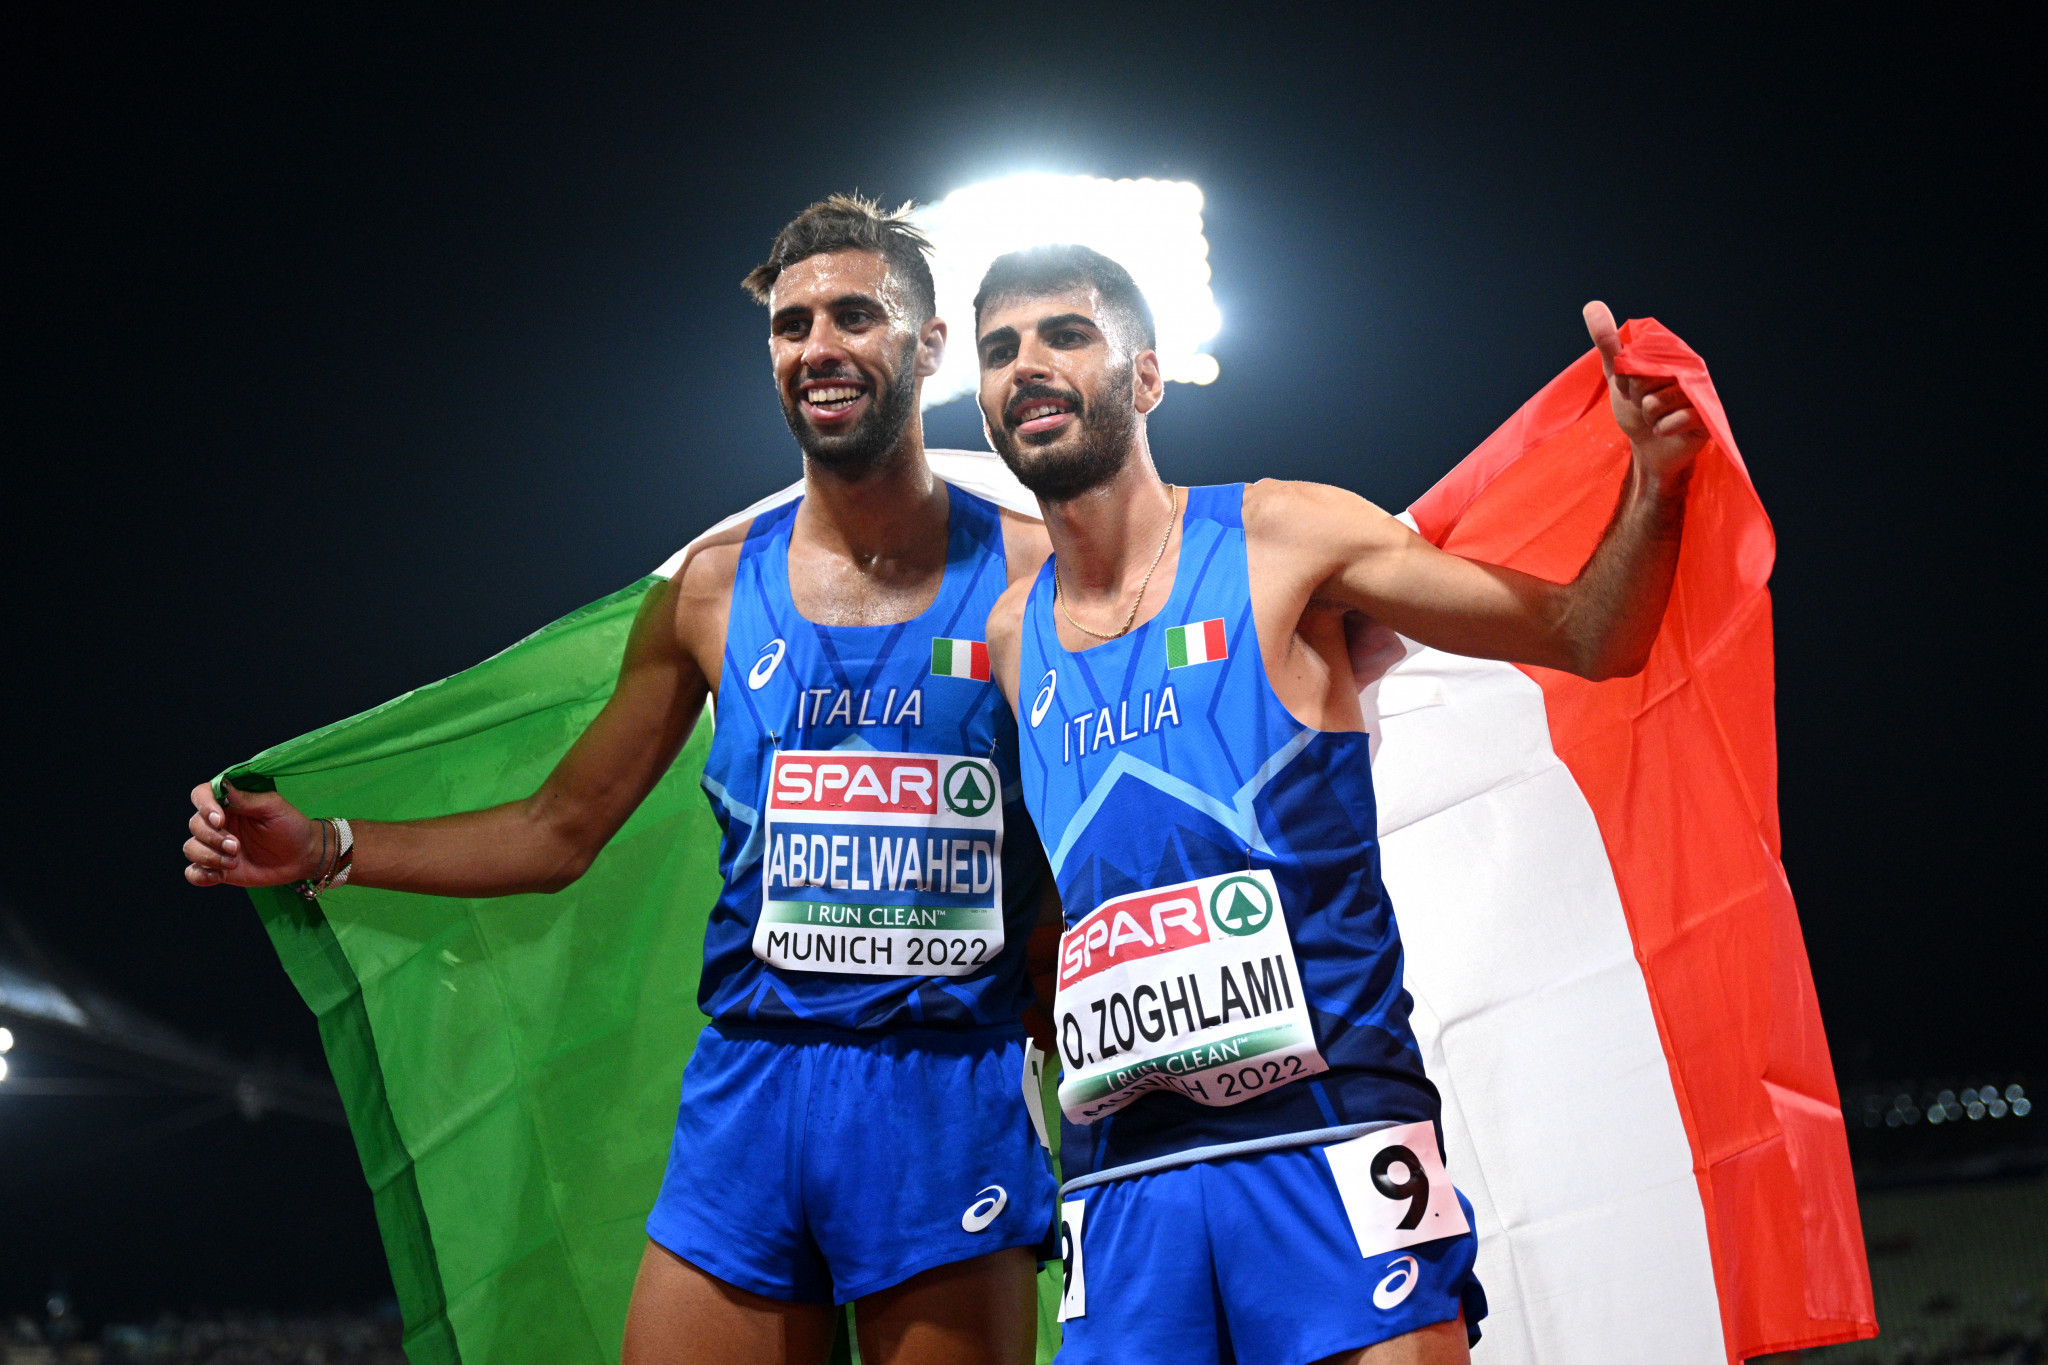 Ahmed Abdelwahed, left, claimed men's 3,000 metres steeplechase silver at the European Championships behind compatriot Osama Zoghlami ©Getty Images